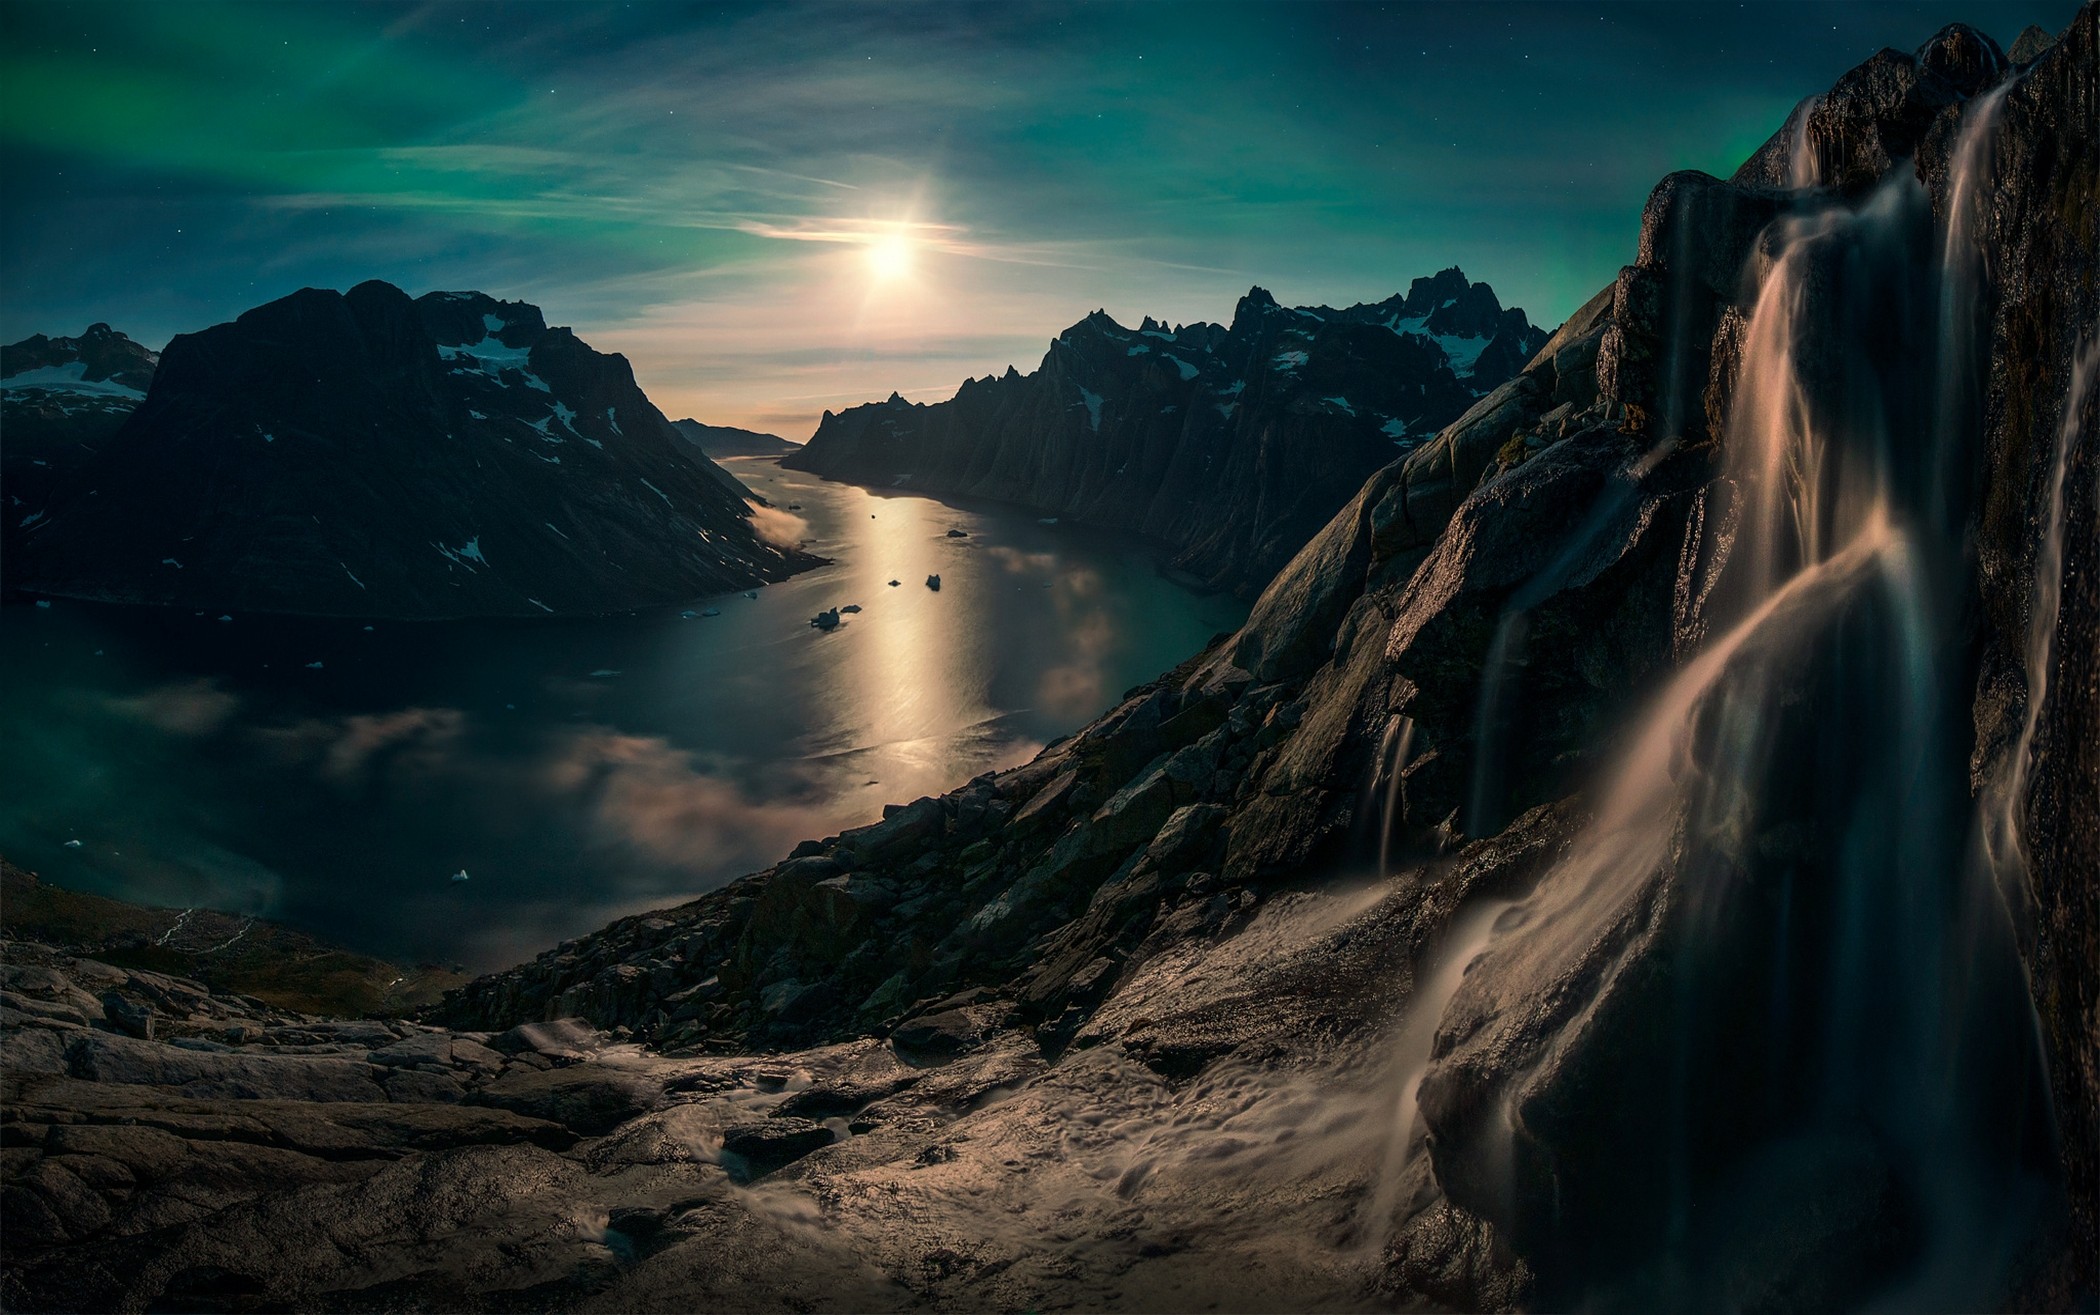 General 2100x1315 nature landscape Moon waterfall sky mountains fjord snowy peak Greenland moonlight reflection stars Max Rive